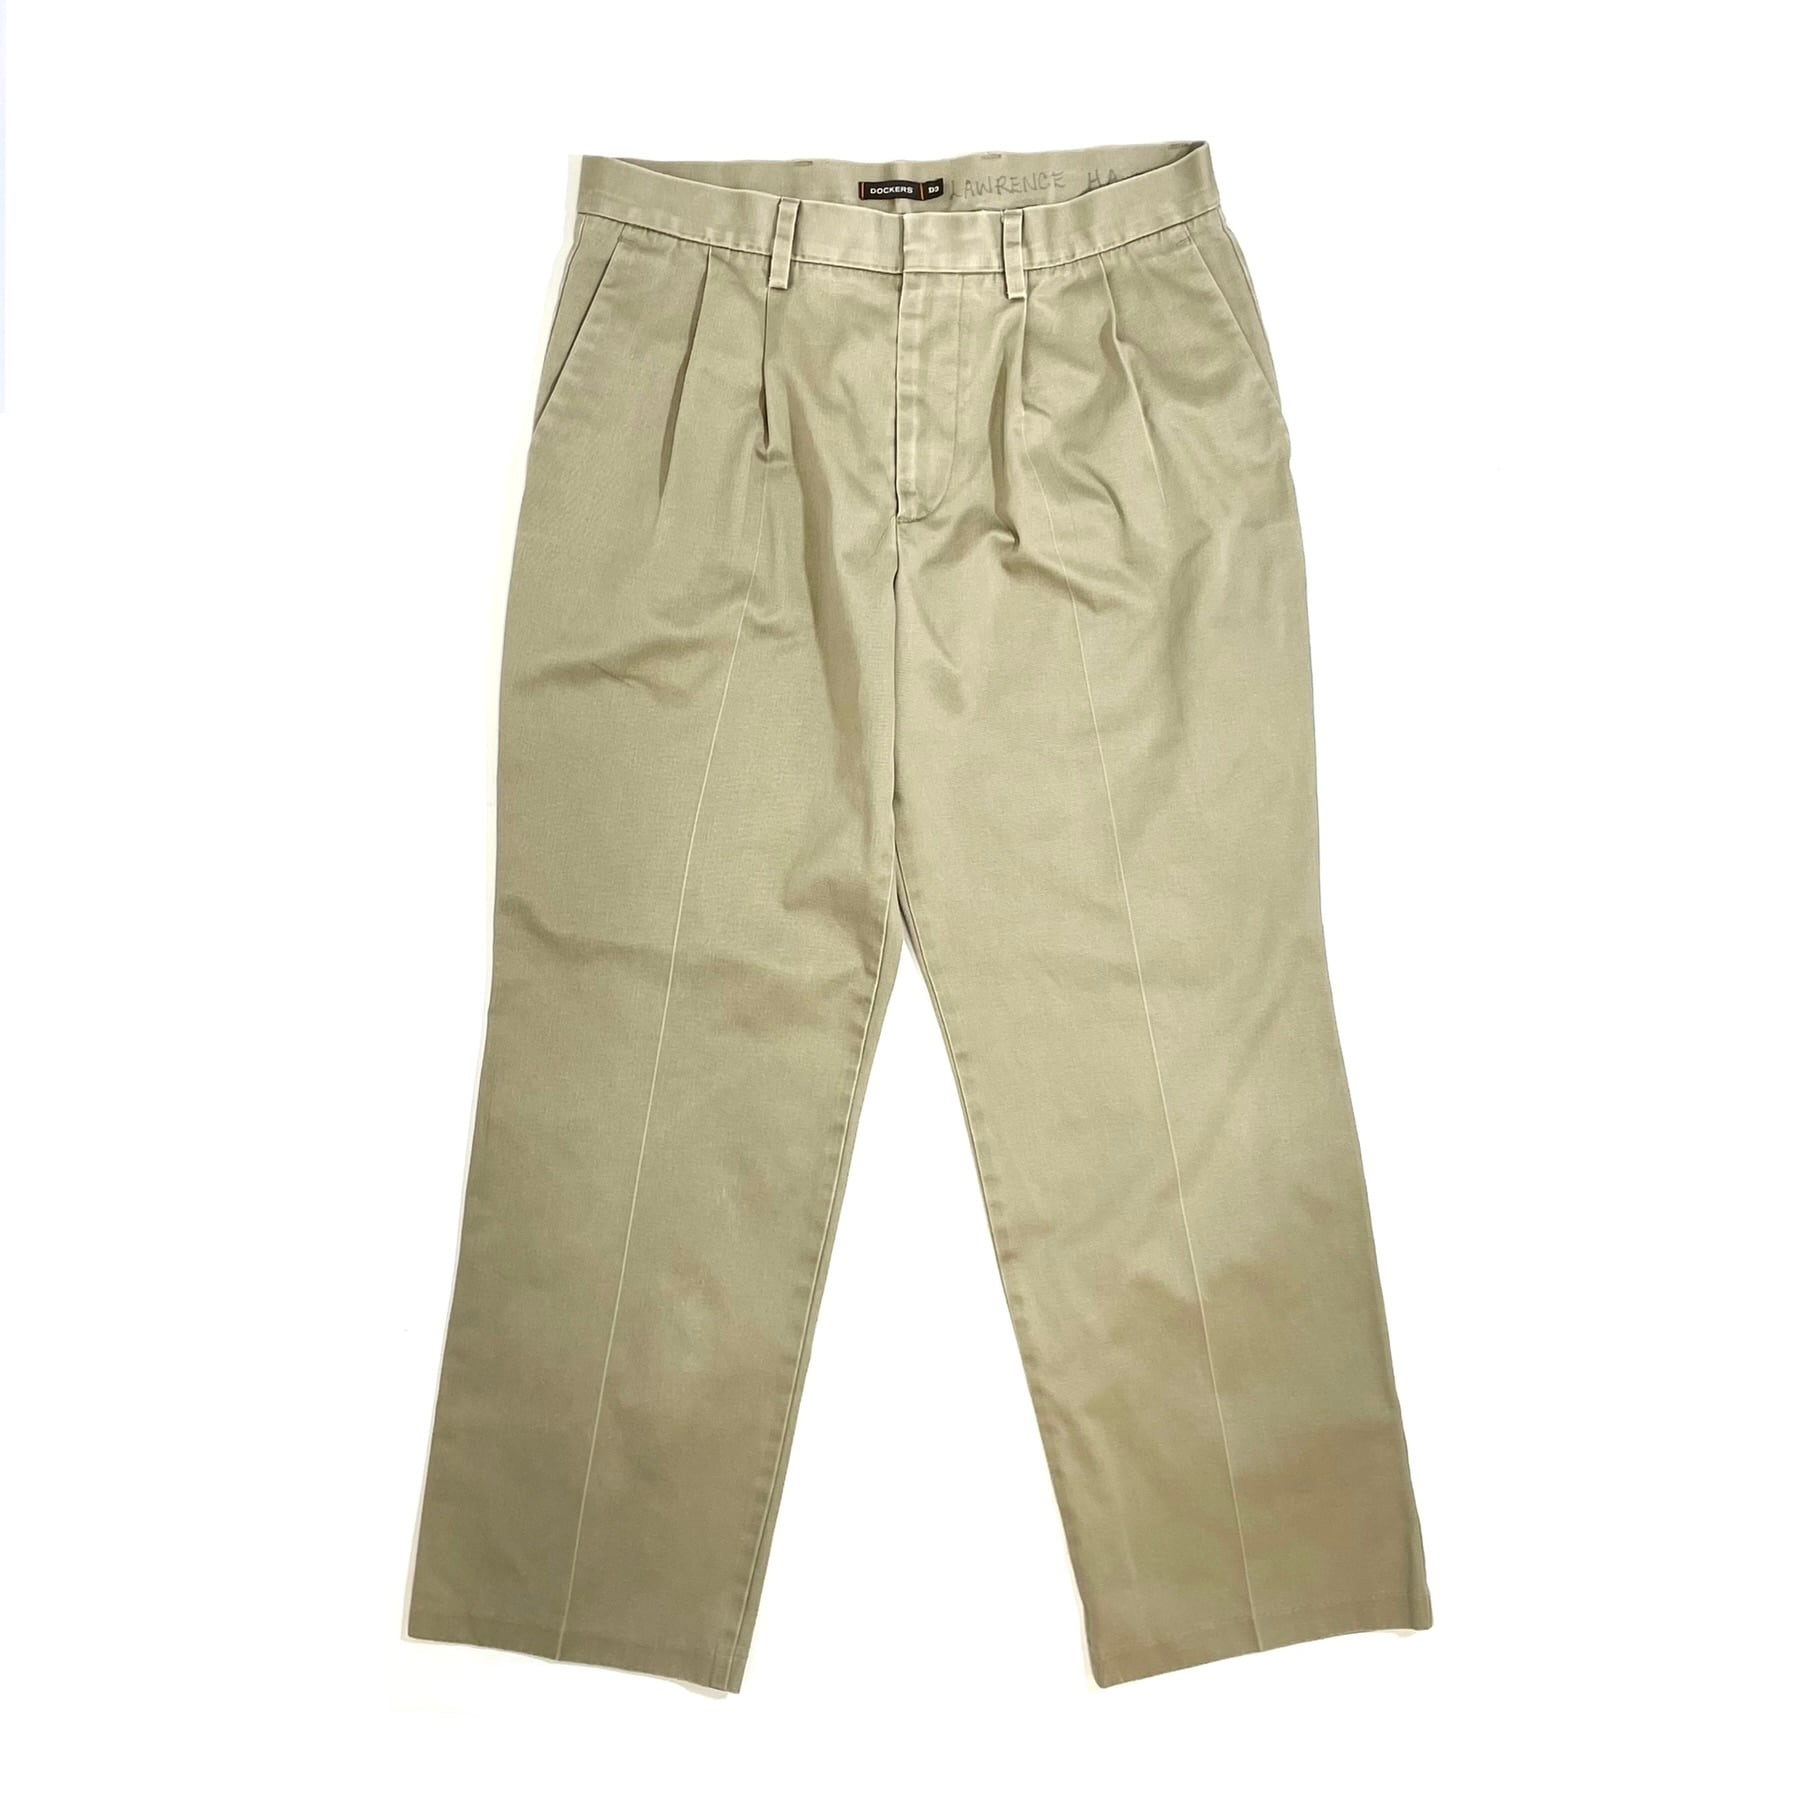 USED 00’s Dockers, 2 tuck chino pants (34x30) - beige | REVERSE STORE  powered by BASE